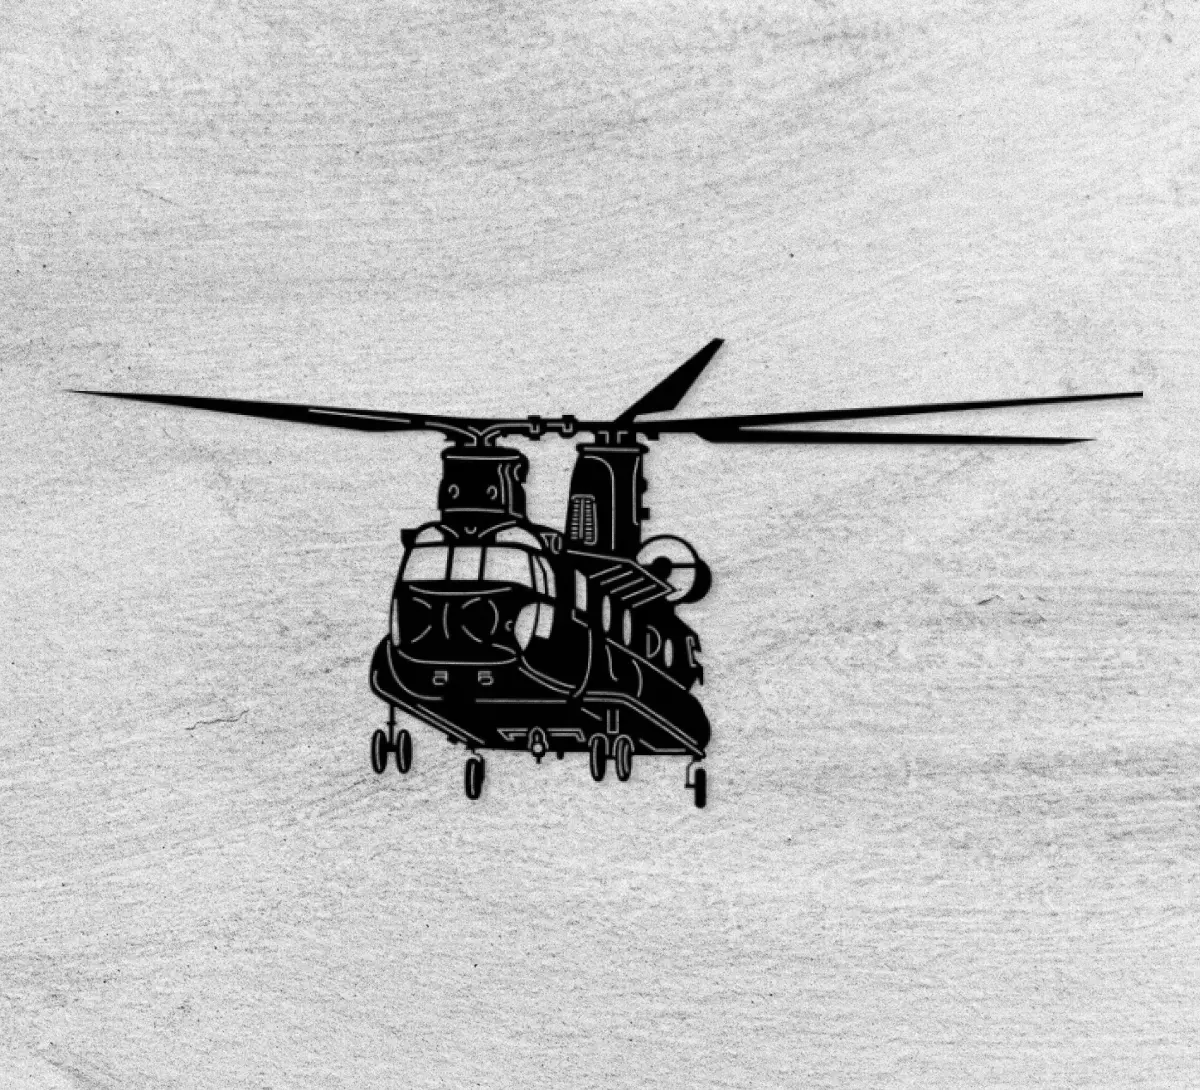 Helicopter 2-D Laser Engraved Gift Home Decor Angel Tree Designs